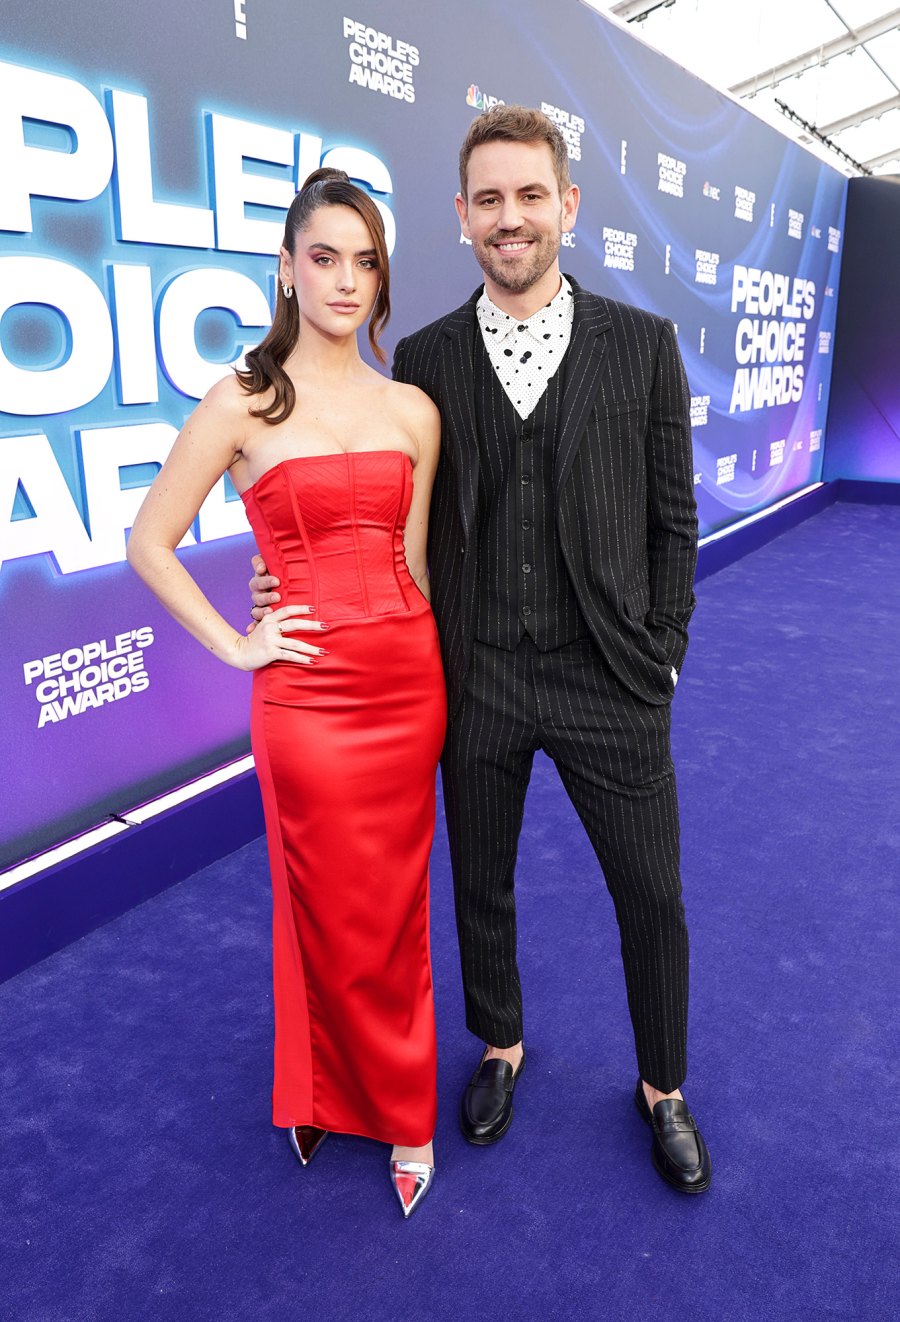 People’s Choice Awards 2022- Hottest Couples on the Red Carpet 770 2022 People’s Choice Awards - Season 48